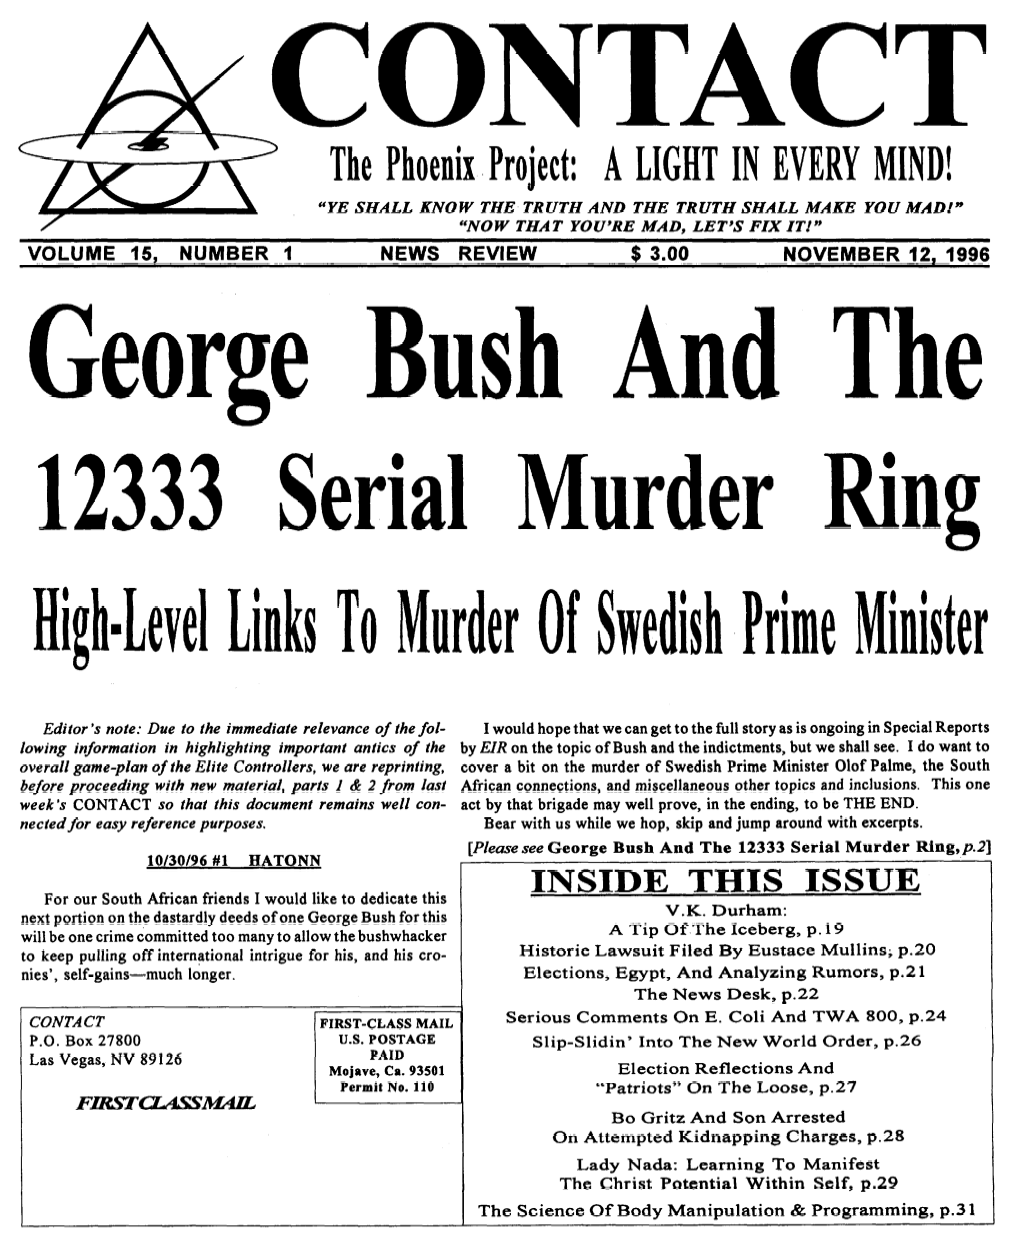 George Bush and the 12333 Serial Murder